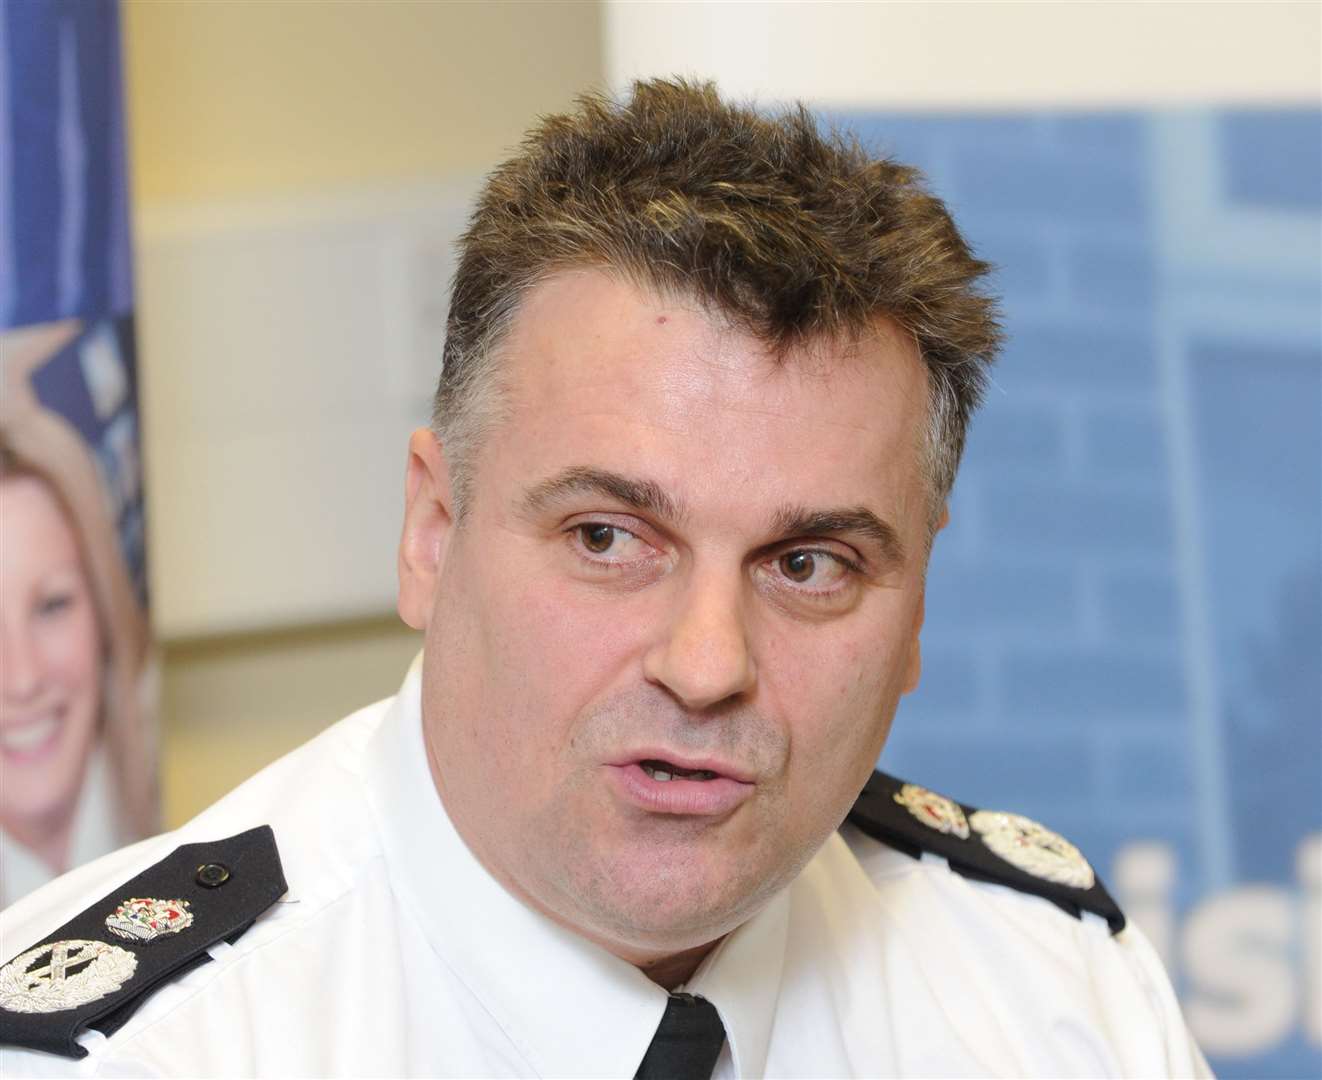 Chief constable Alan Pughsley will decide how the money is spent